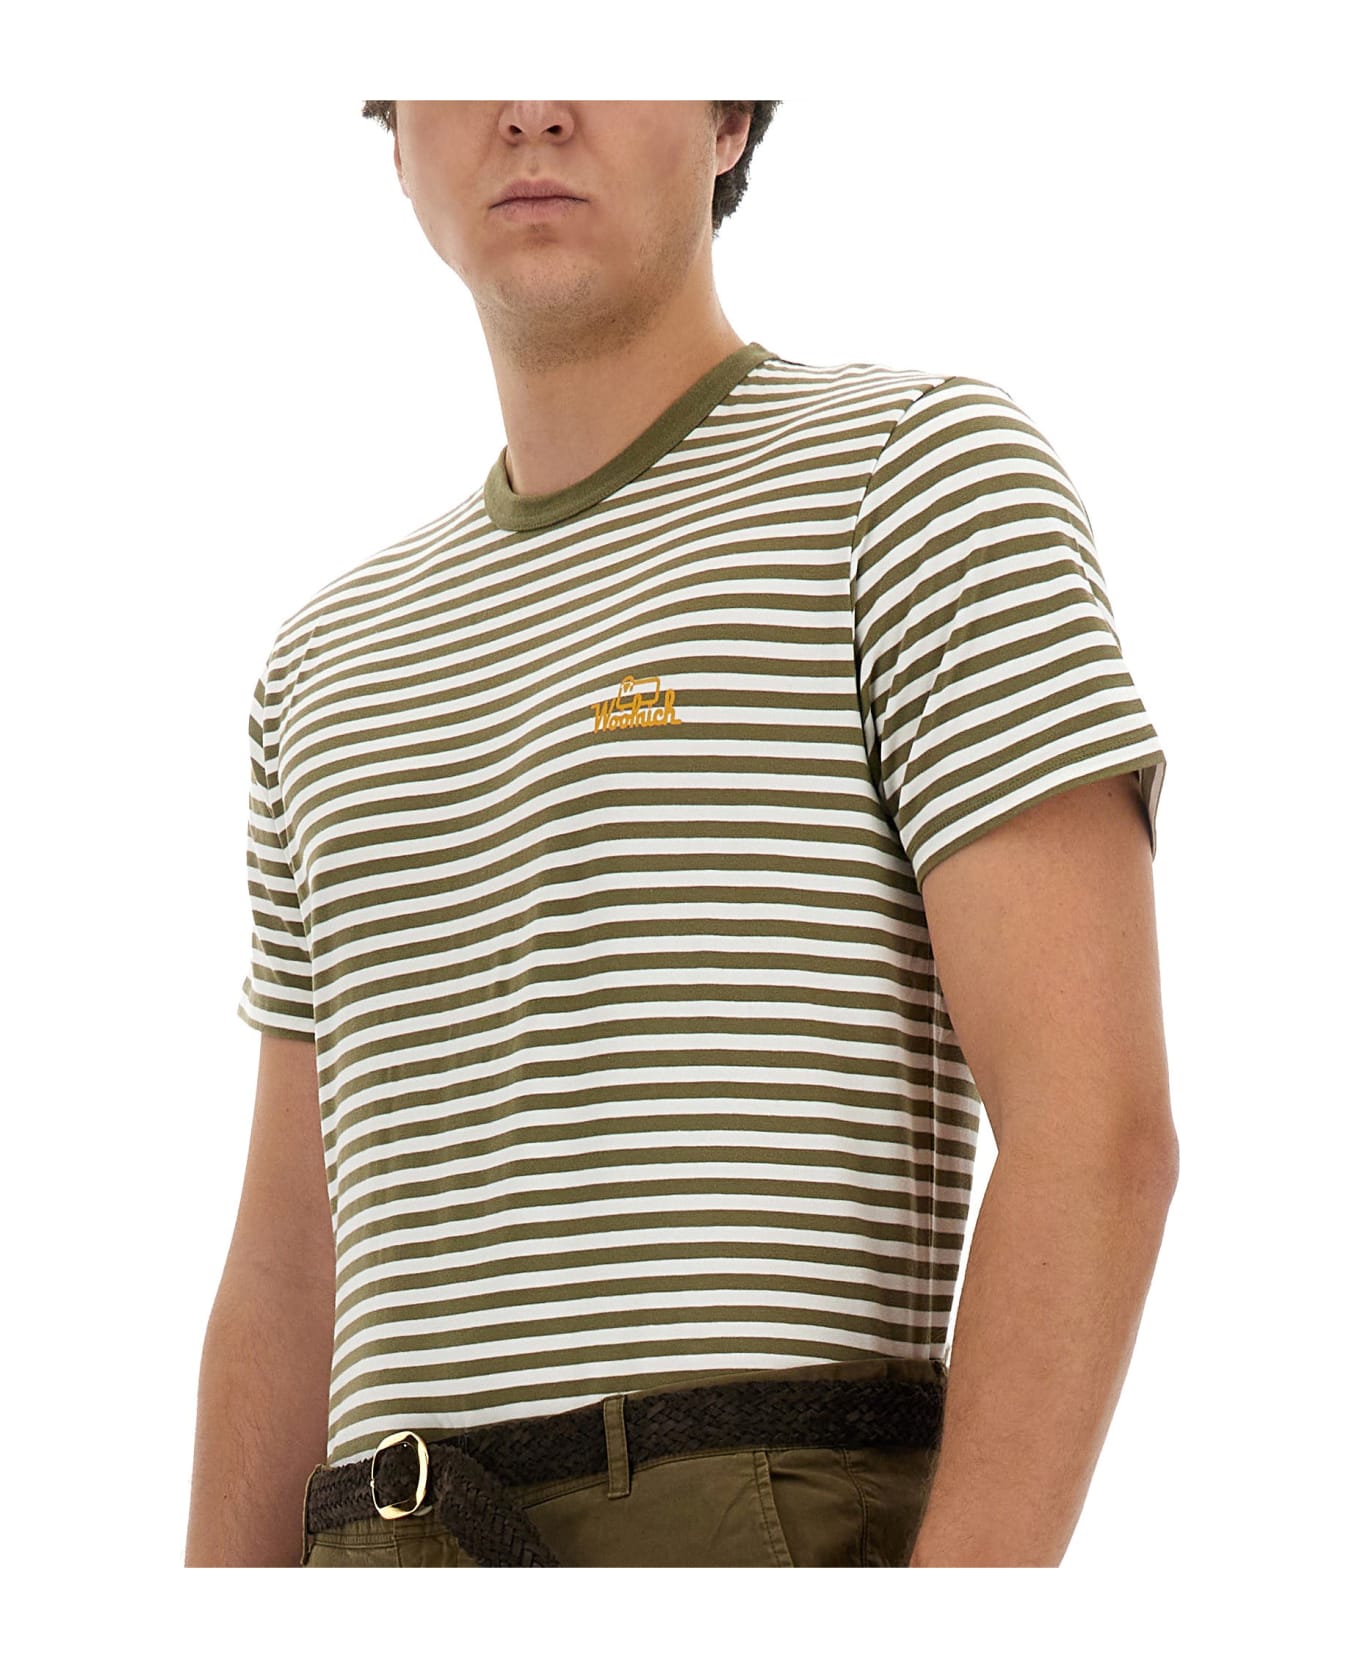 Woolrich Striped T-shirt - Military